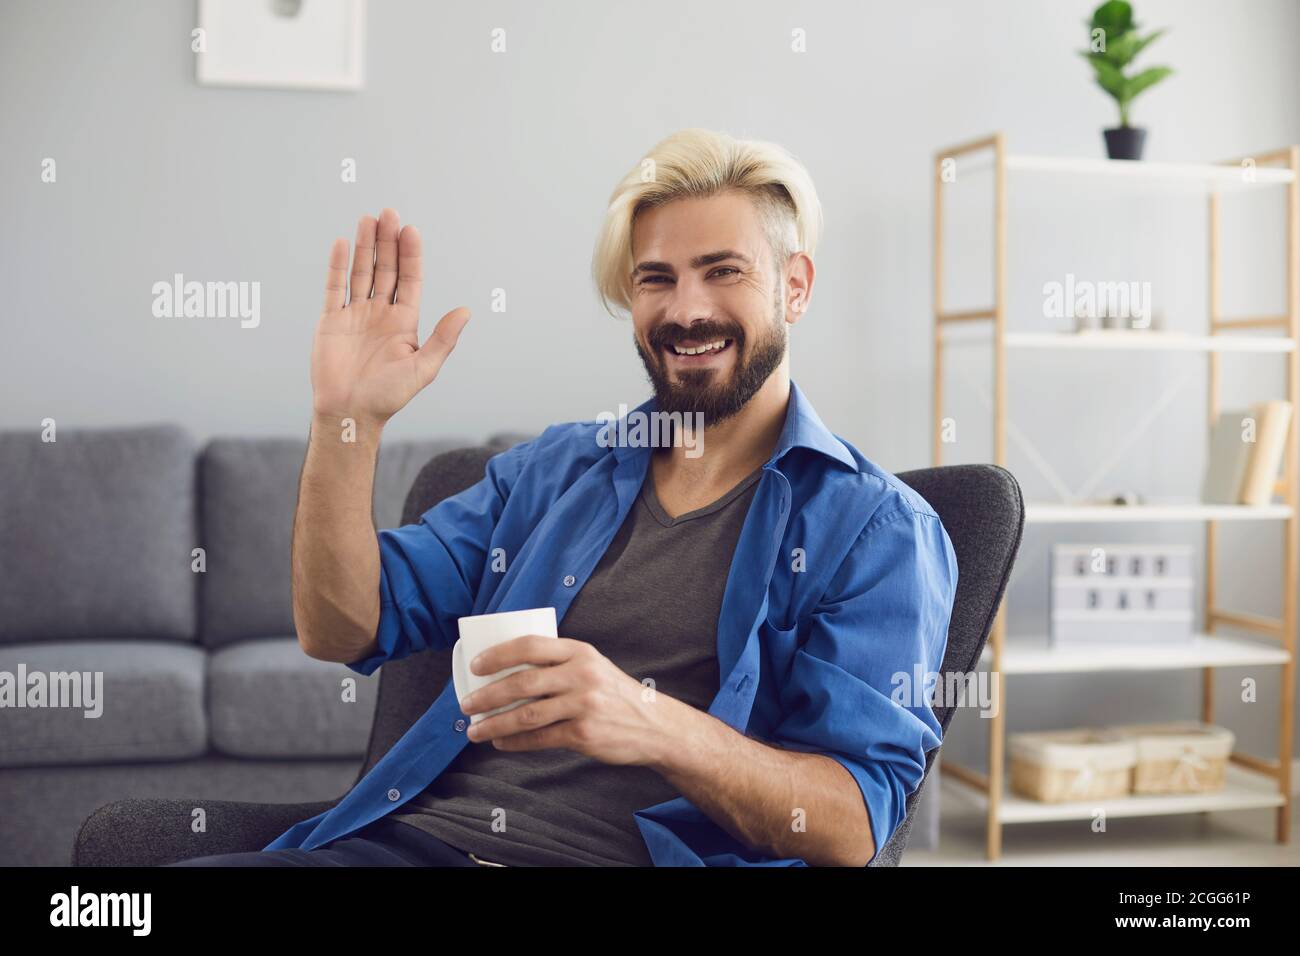 Smiling man sitting at home and greeting somebody with hand online looking at web camera Stock Photo